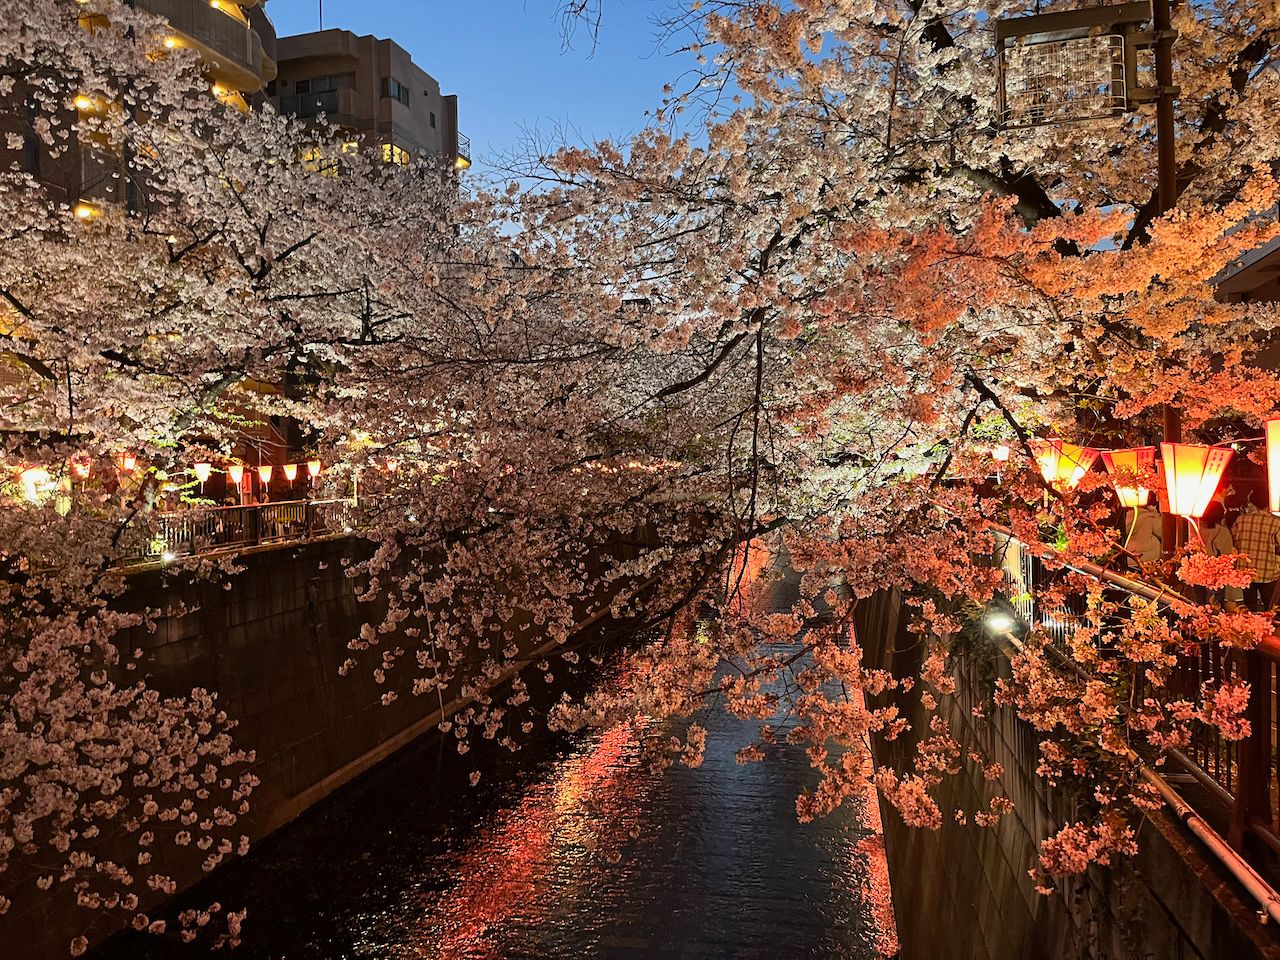 Blossoming cherry trees cover most of the picture from the sides of a shallow canal. The canal is lined and lit by traditional Japanese lamps, that reflect a pink glow on the water.